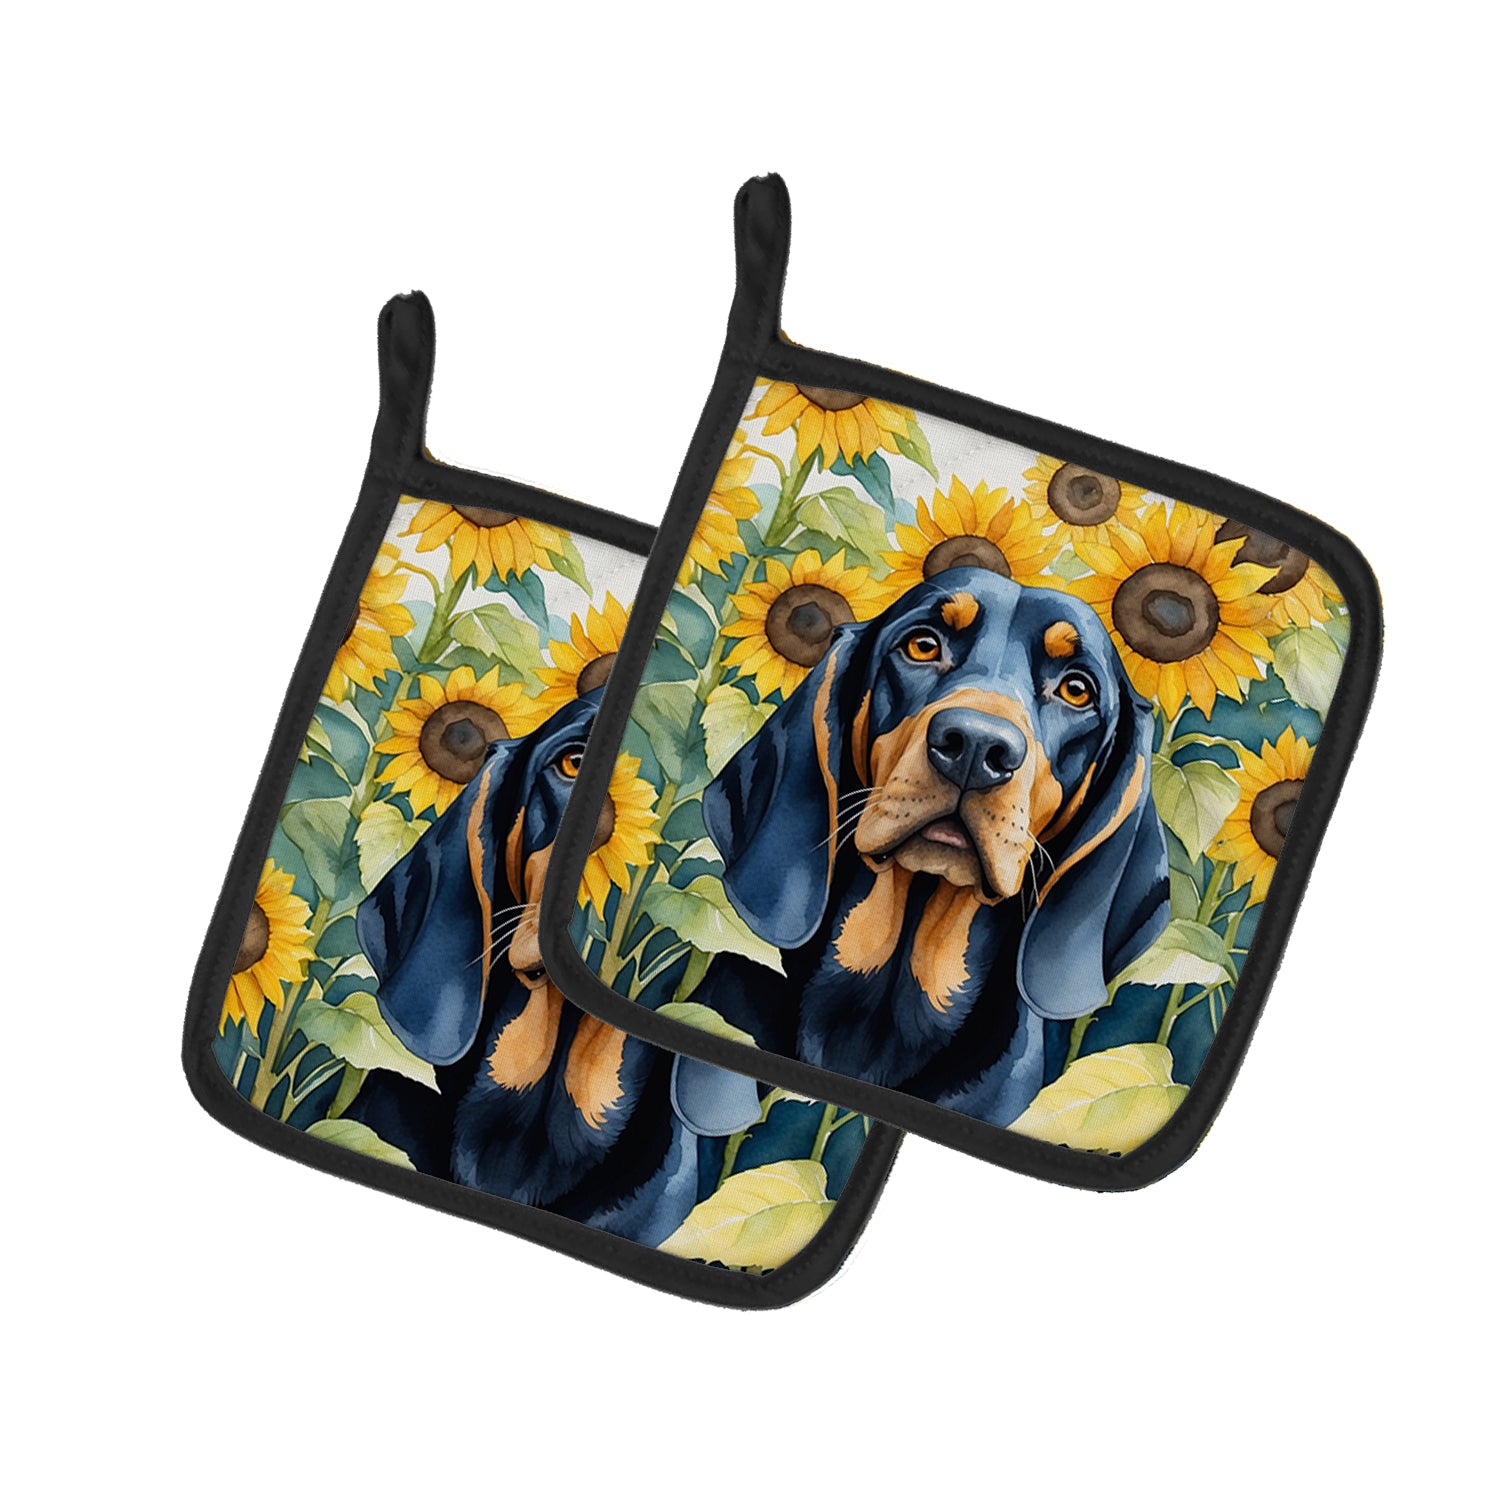 Buy this Black and Tan Coonhound in Sunflowers Pair of Pot Holders